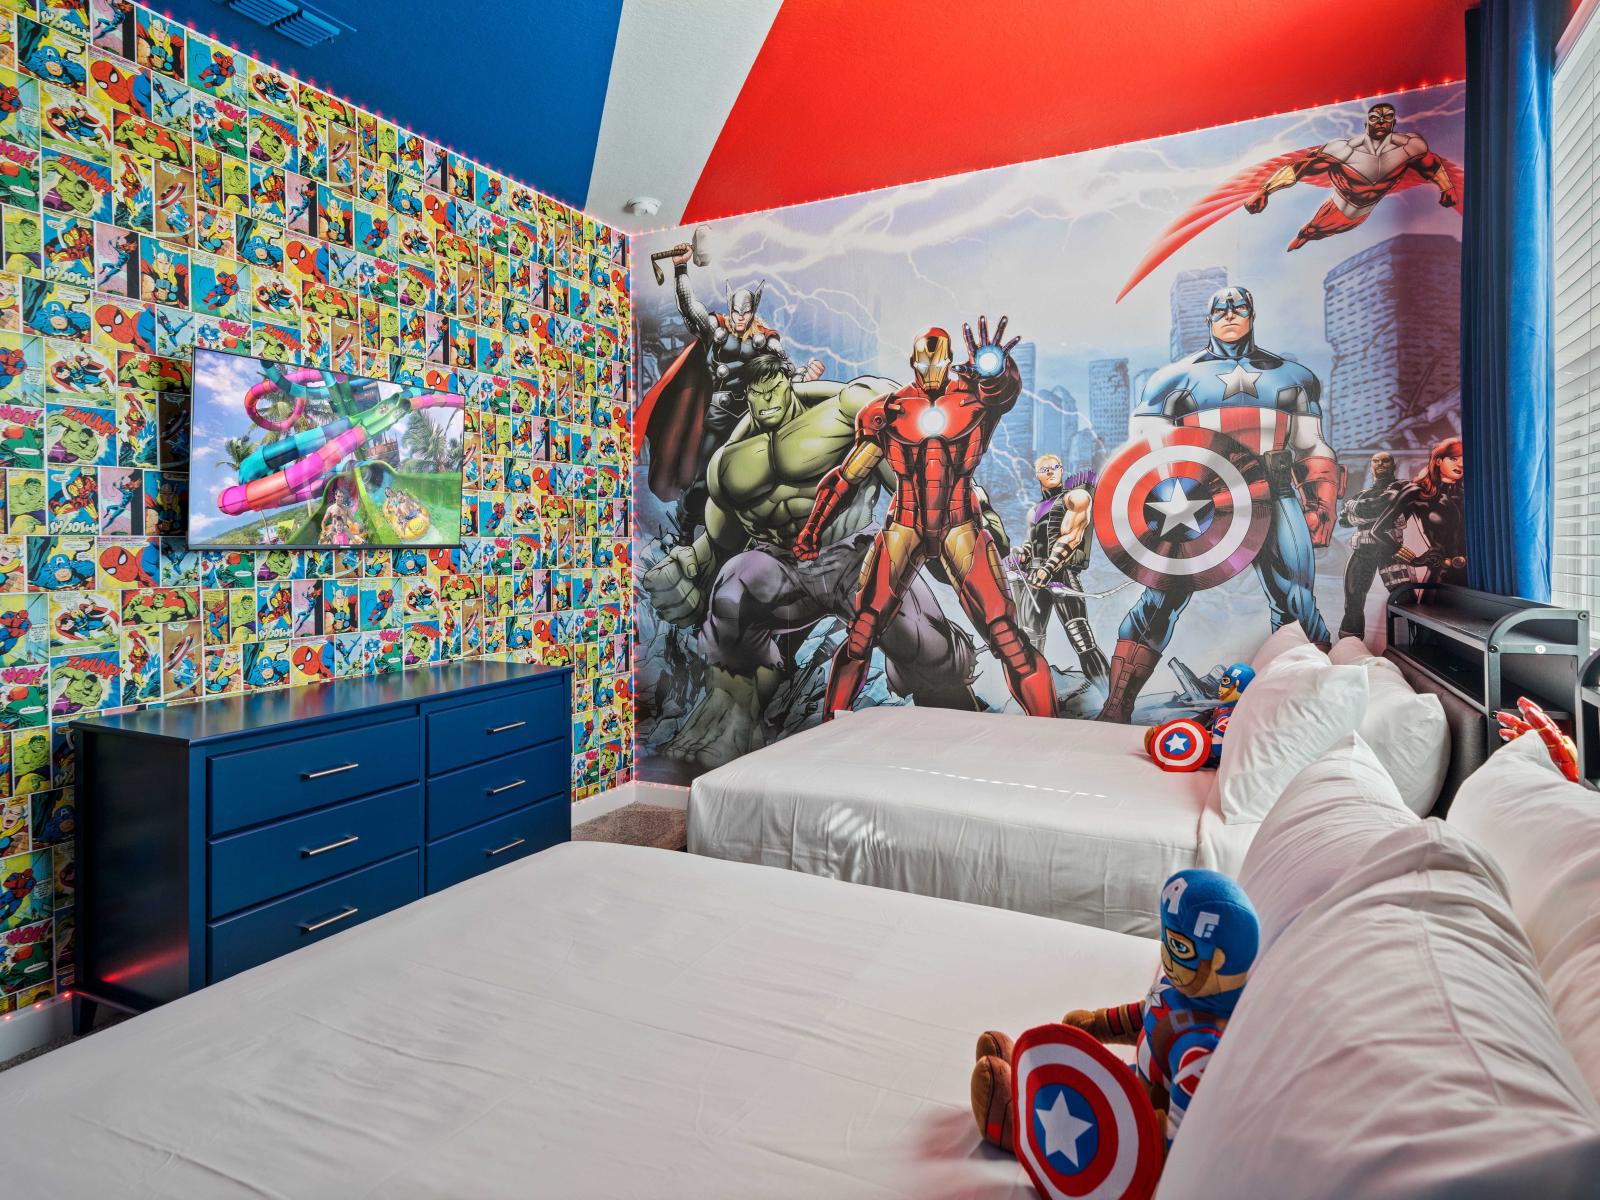 Marvel themed Bedroom of the Home in Davenport Florida - Drift into a world of adventure in Marvel-themed bedroom - Smart TV and Netflix - Offering Twin bed set the stage for a supercharged stay